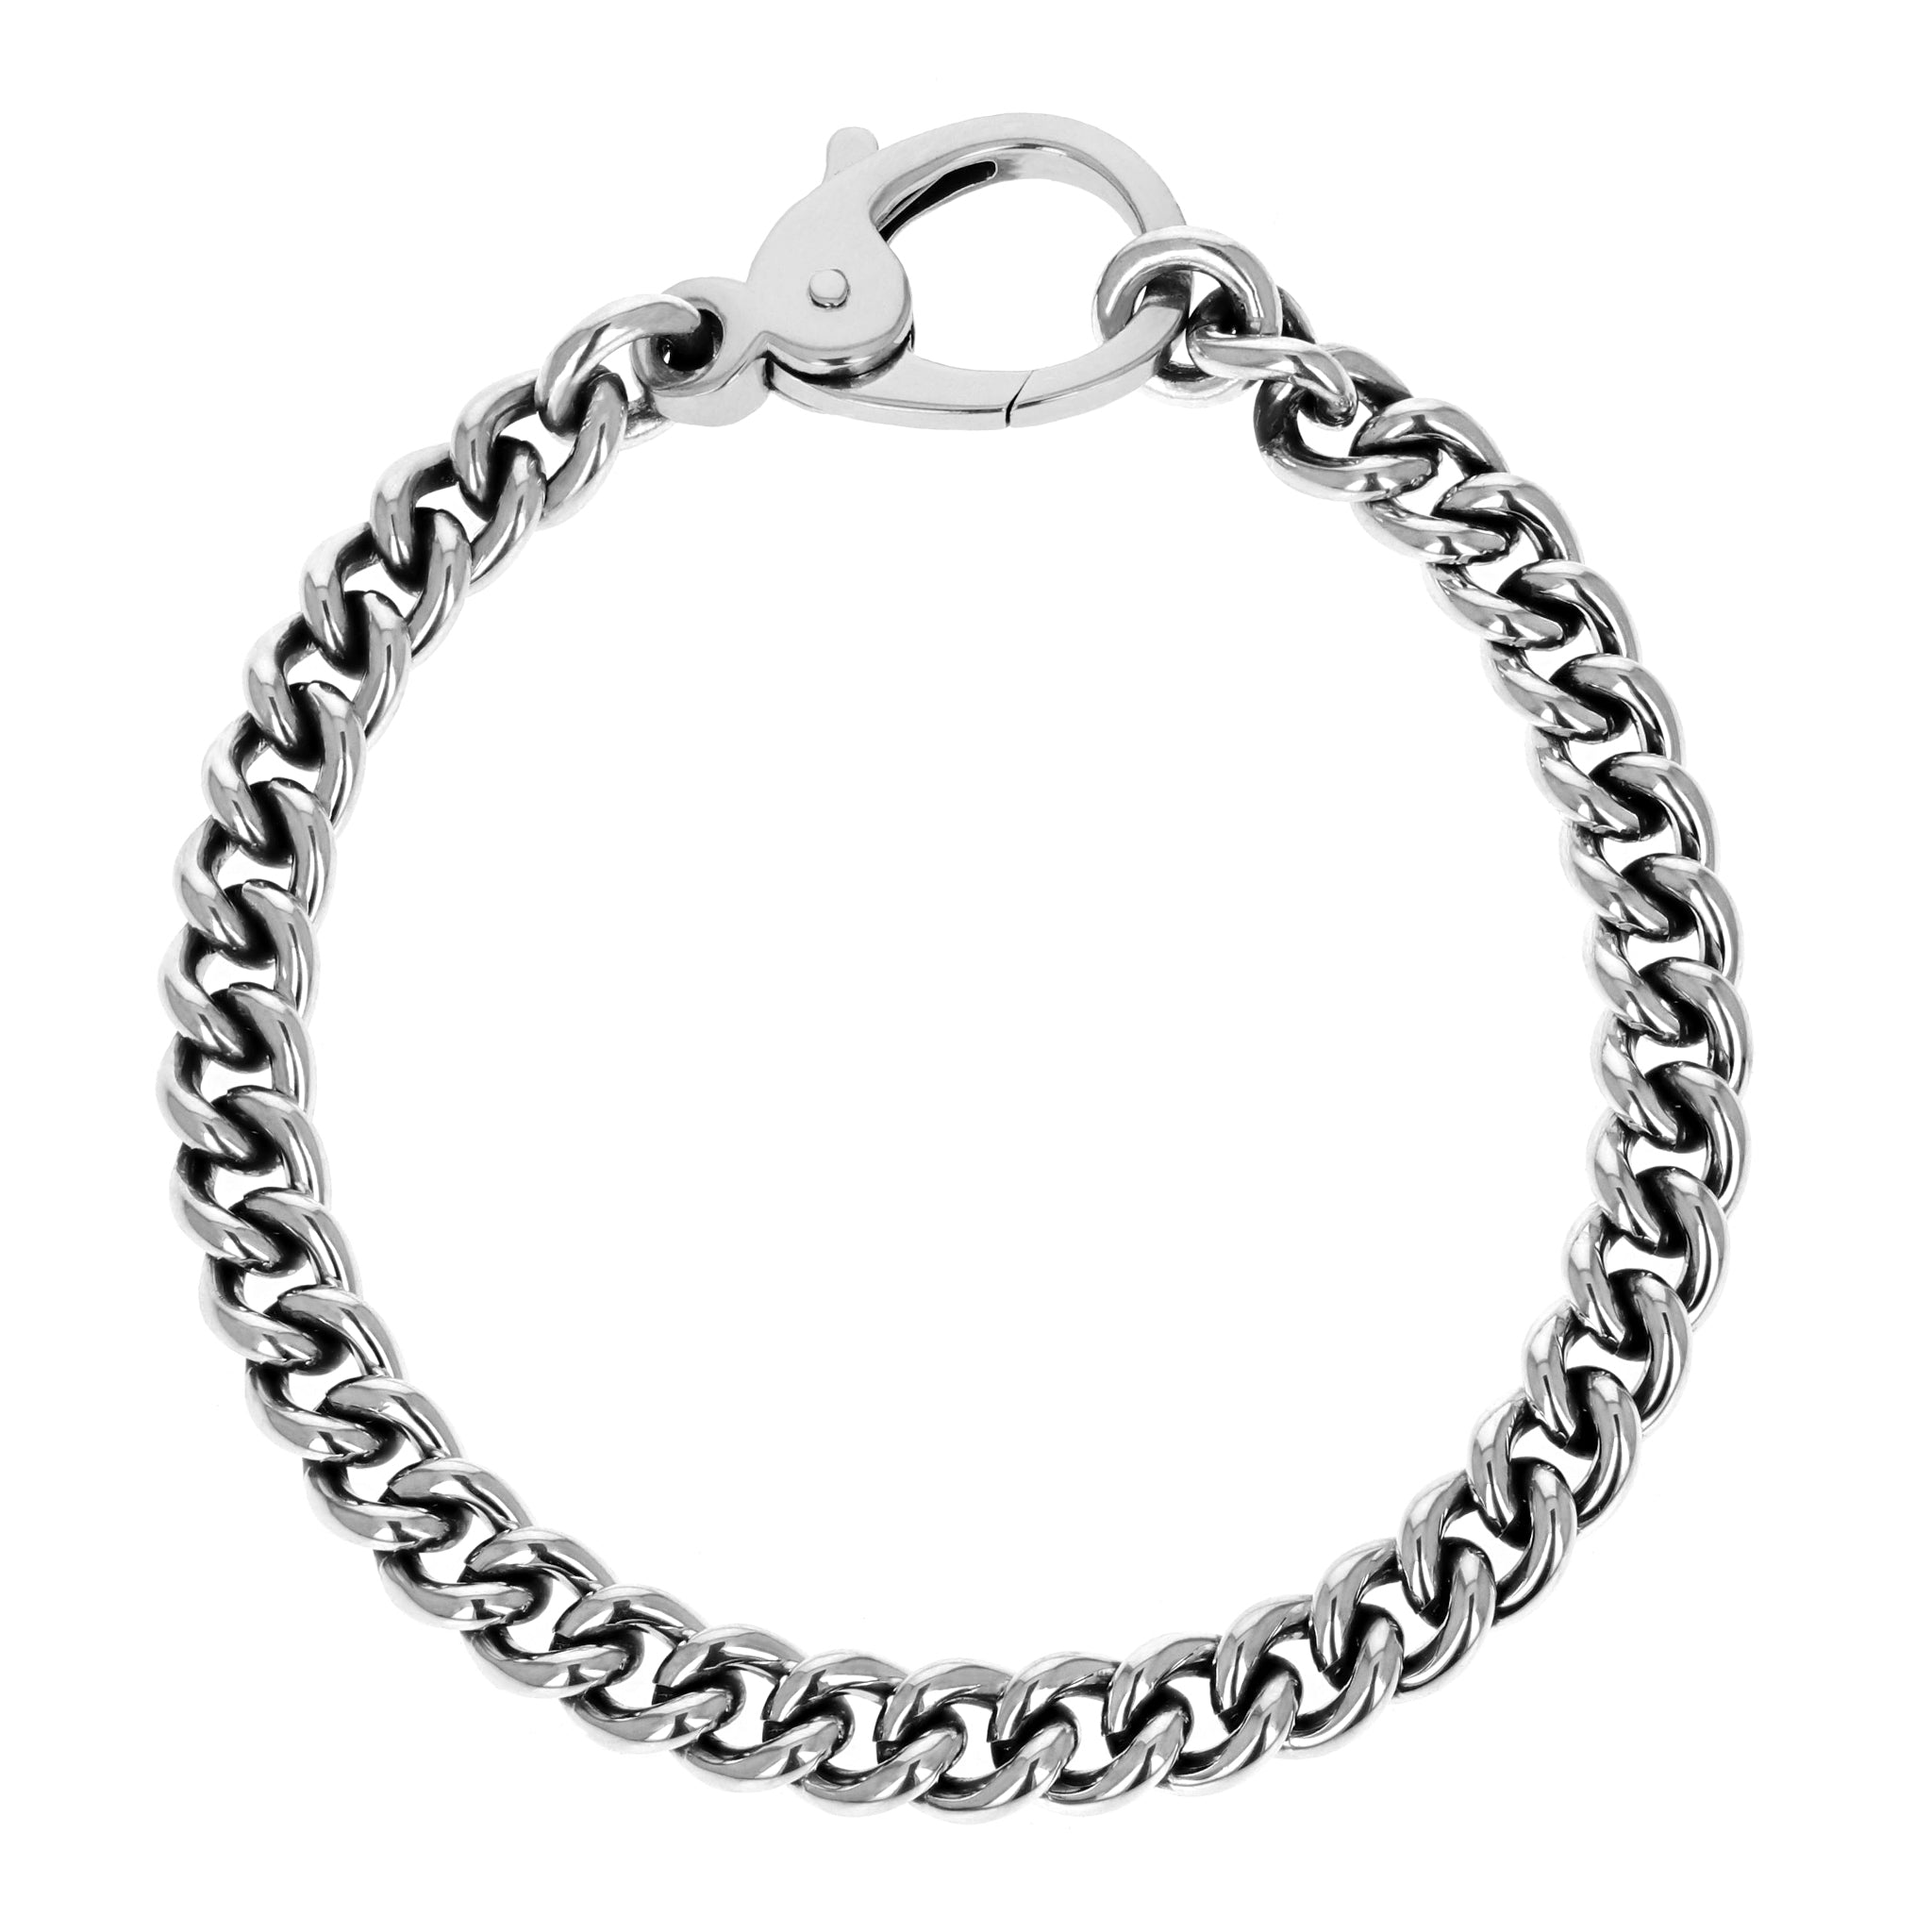 2mm Curb Link Chain Bracelet w/ Large Lobster Clasp – King Baby